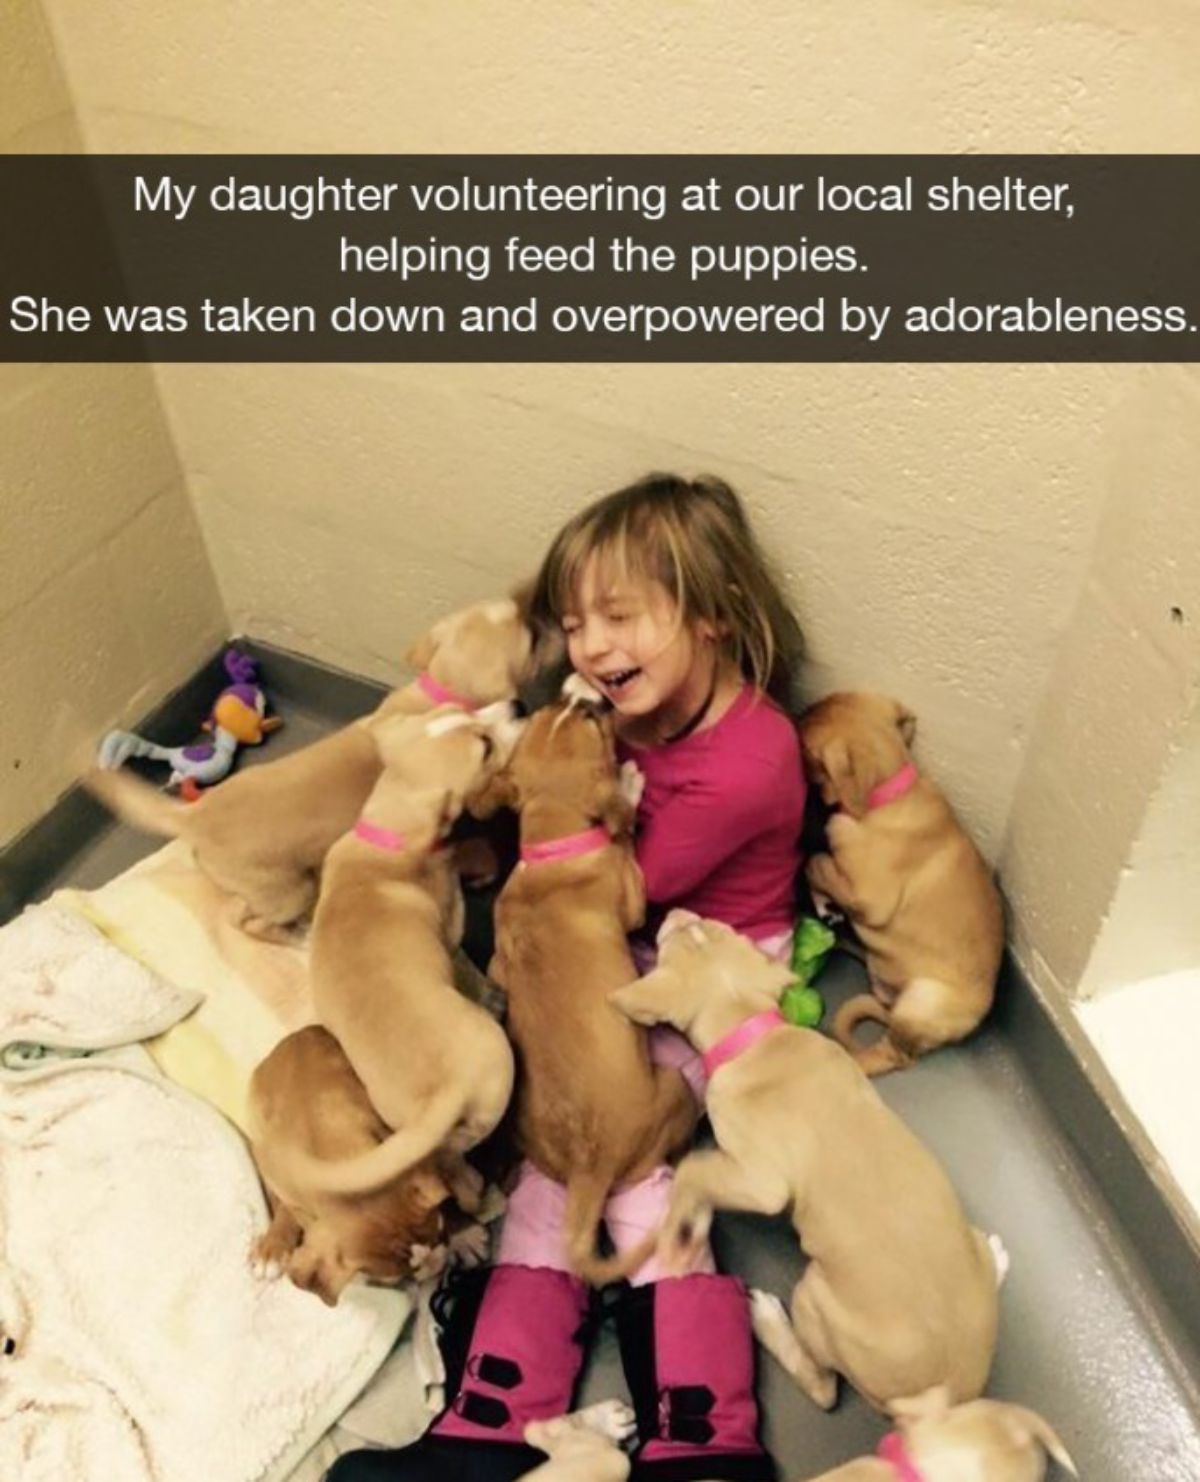 7 brown puppies around a little girl on the floor of a shelter